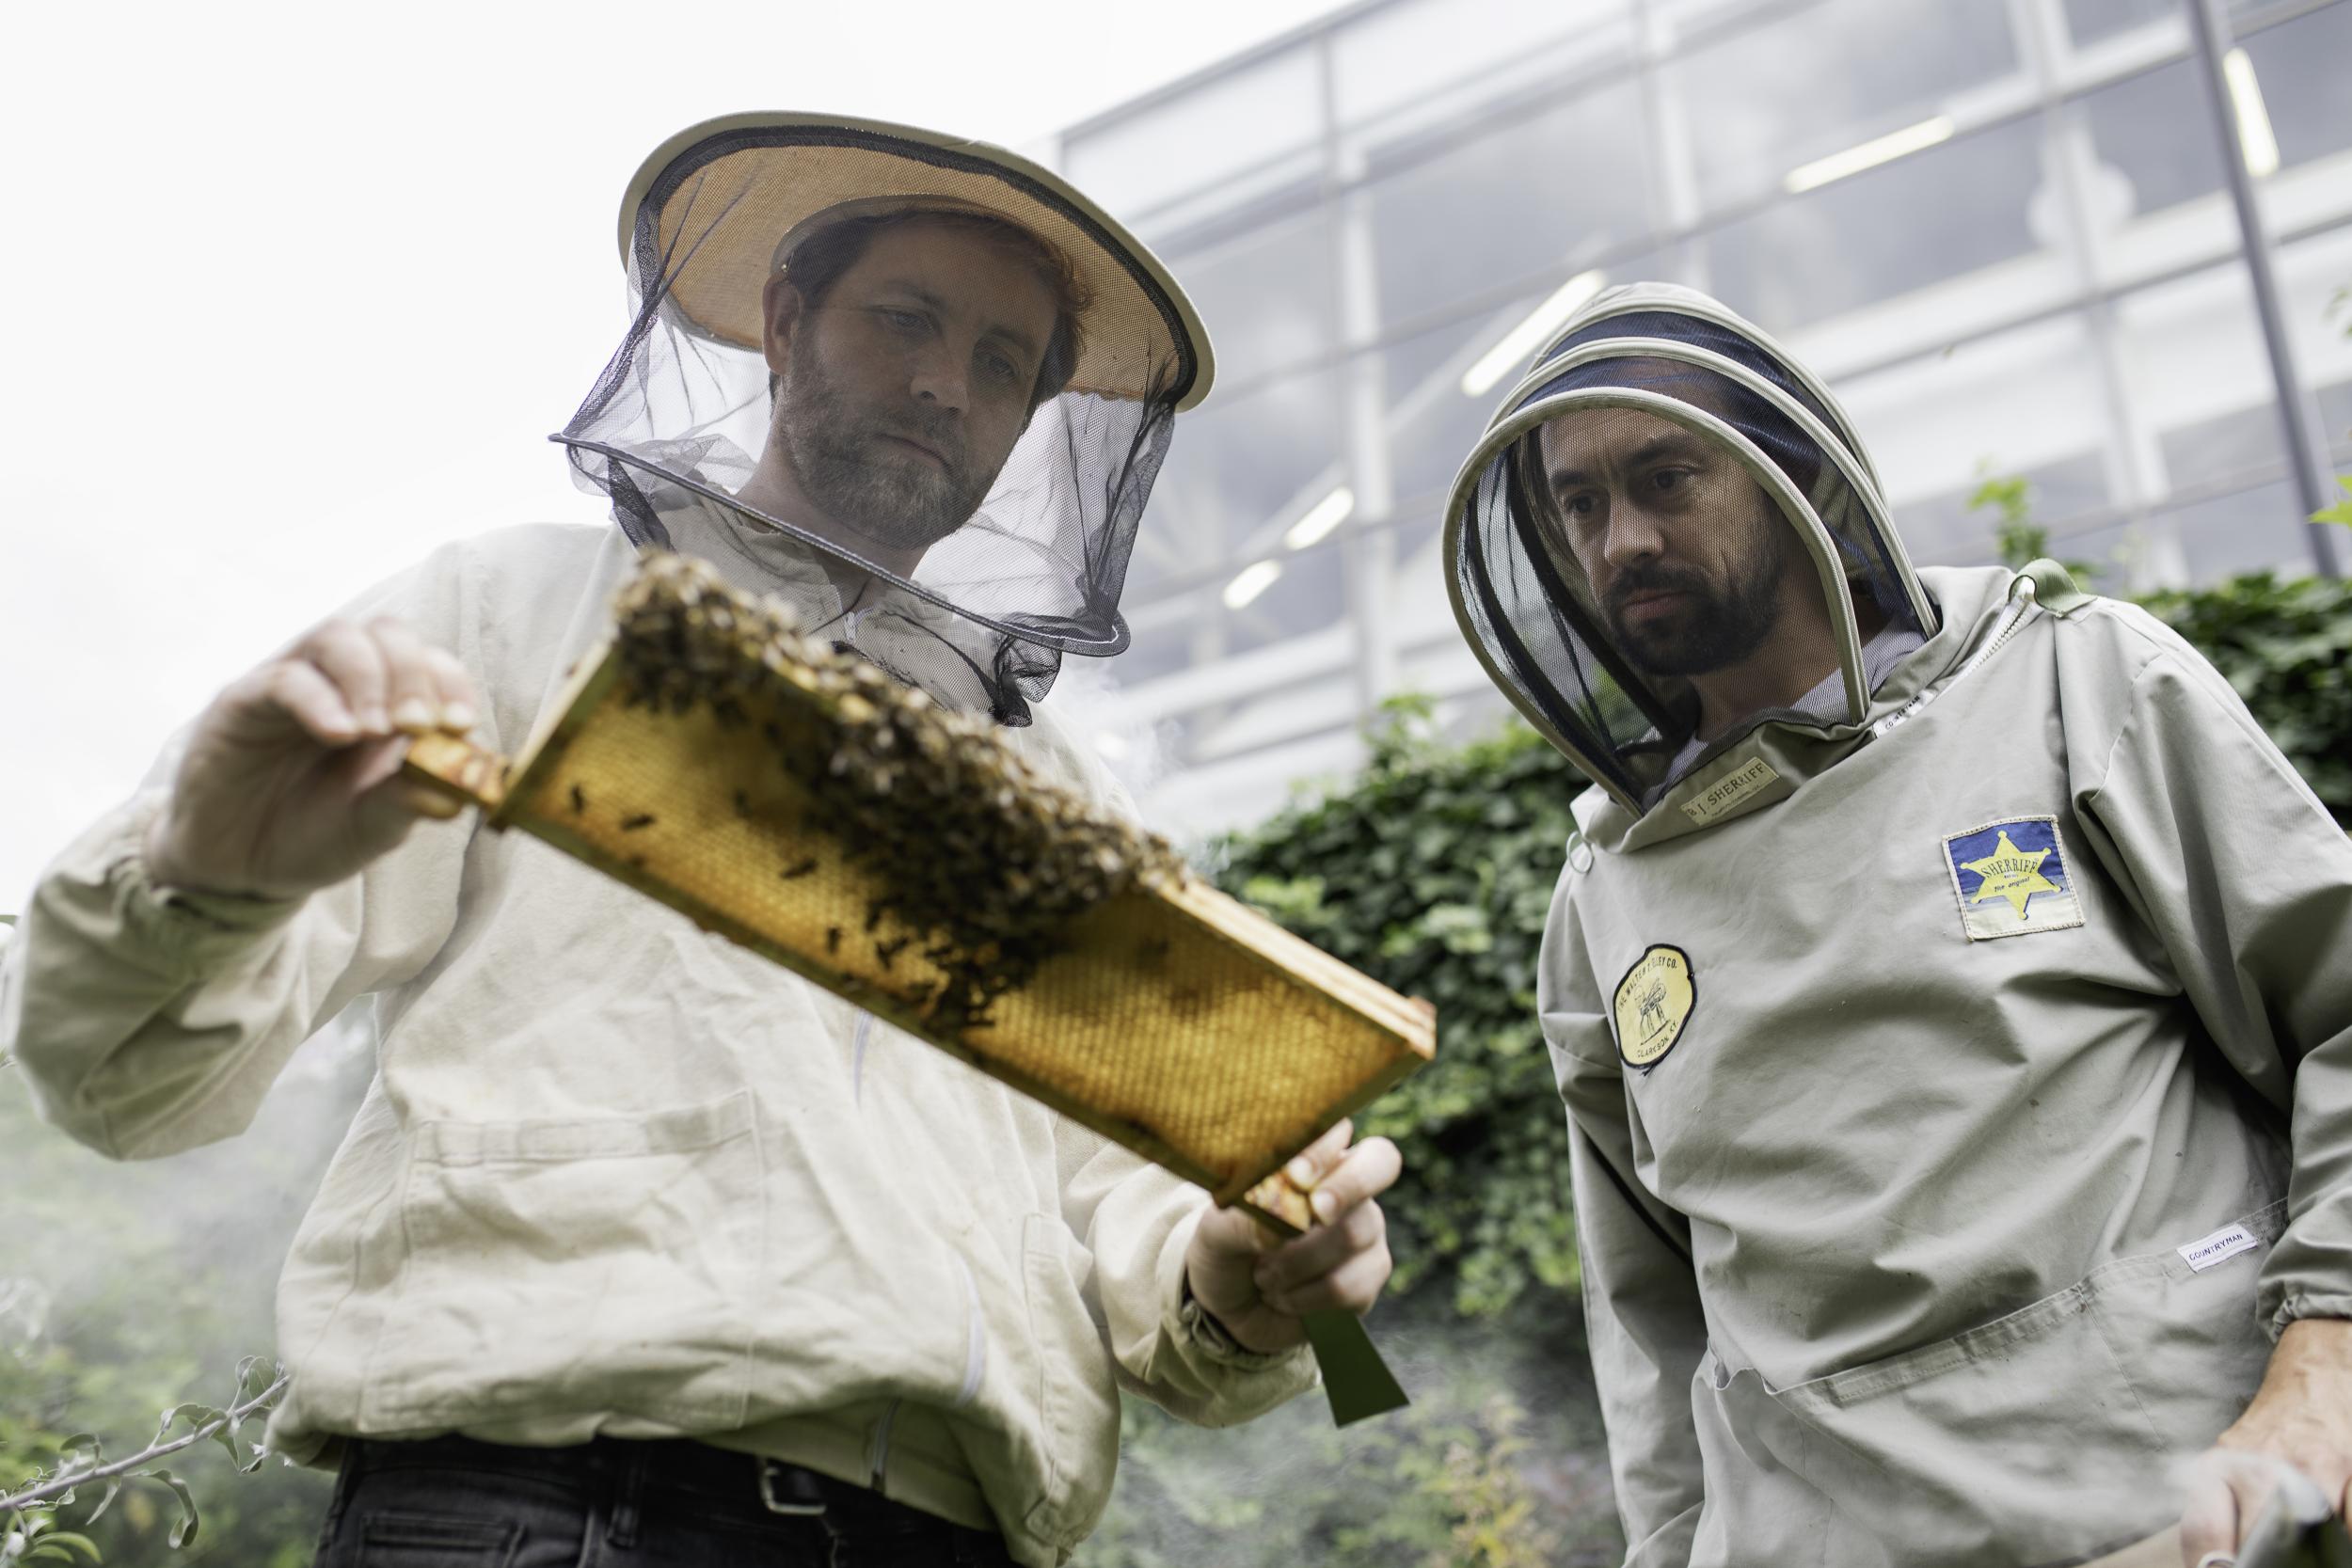 Urban beekeepers Chris Barnes and Paul Webb check on one of their hives